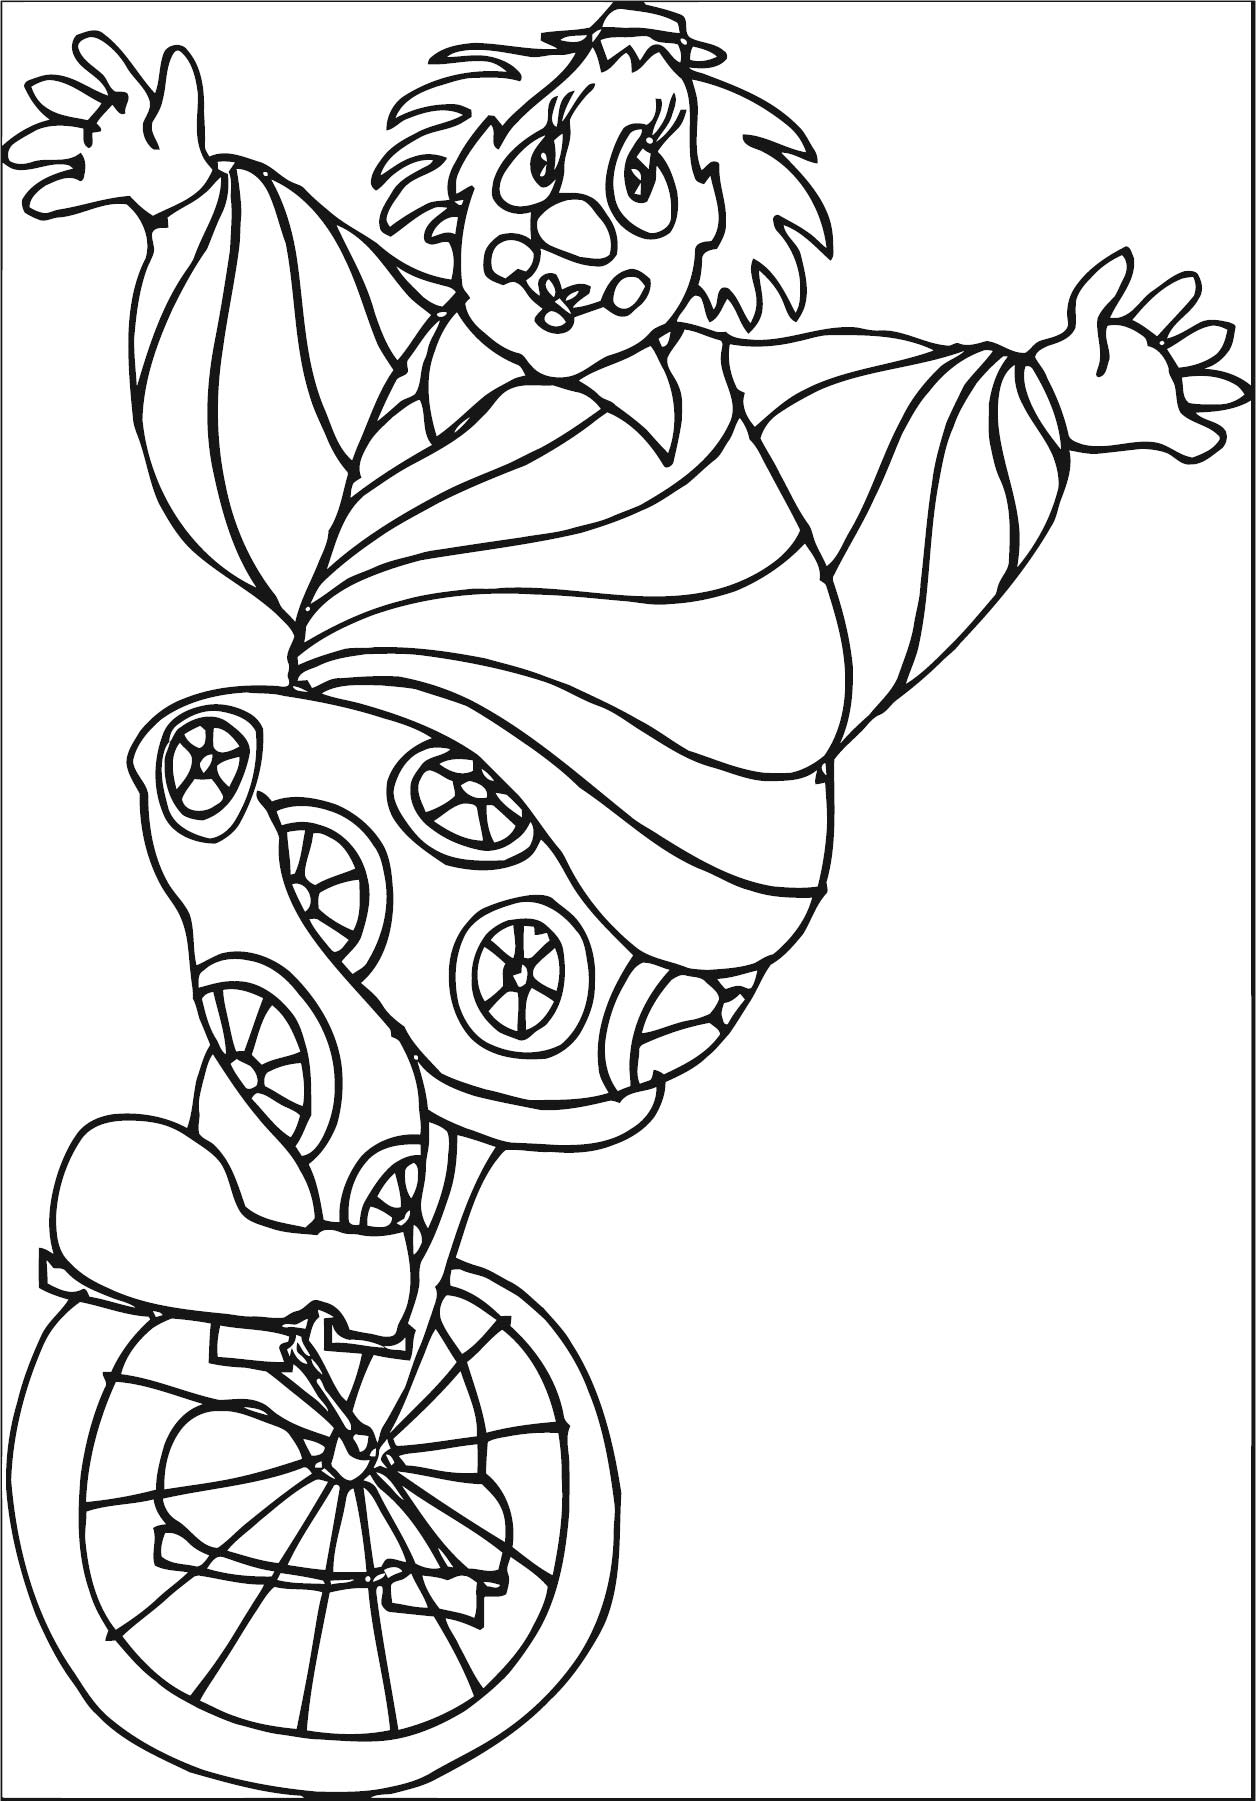 circus clown coloring pages